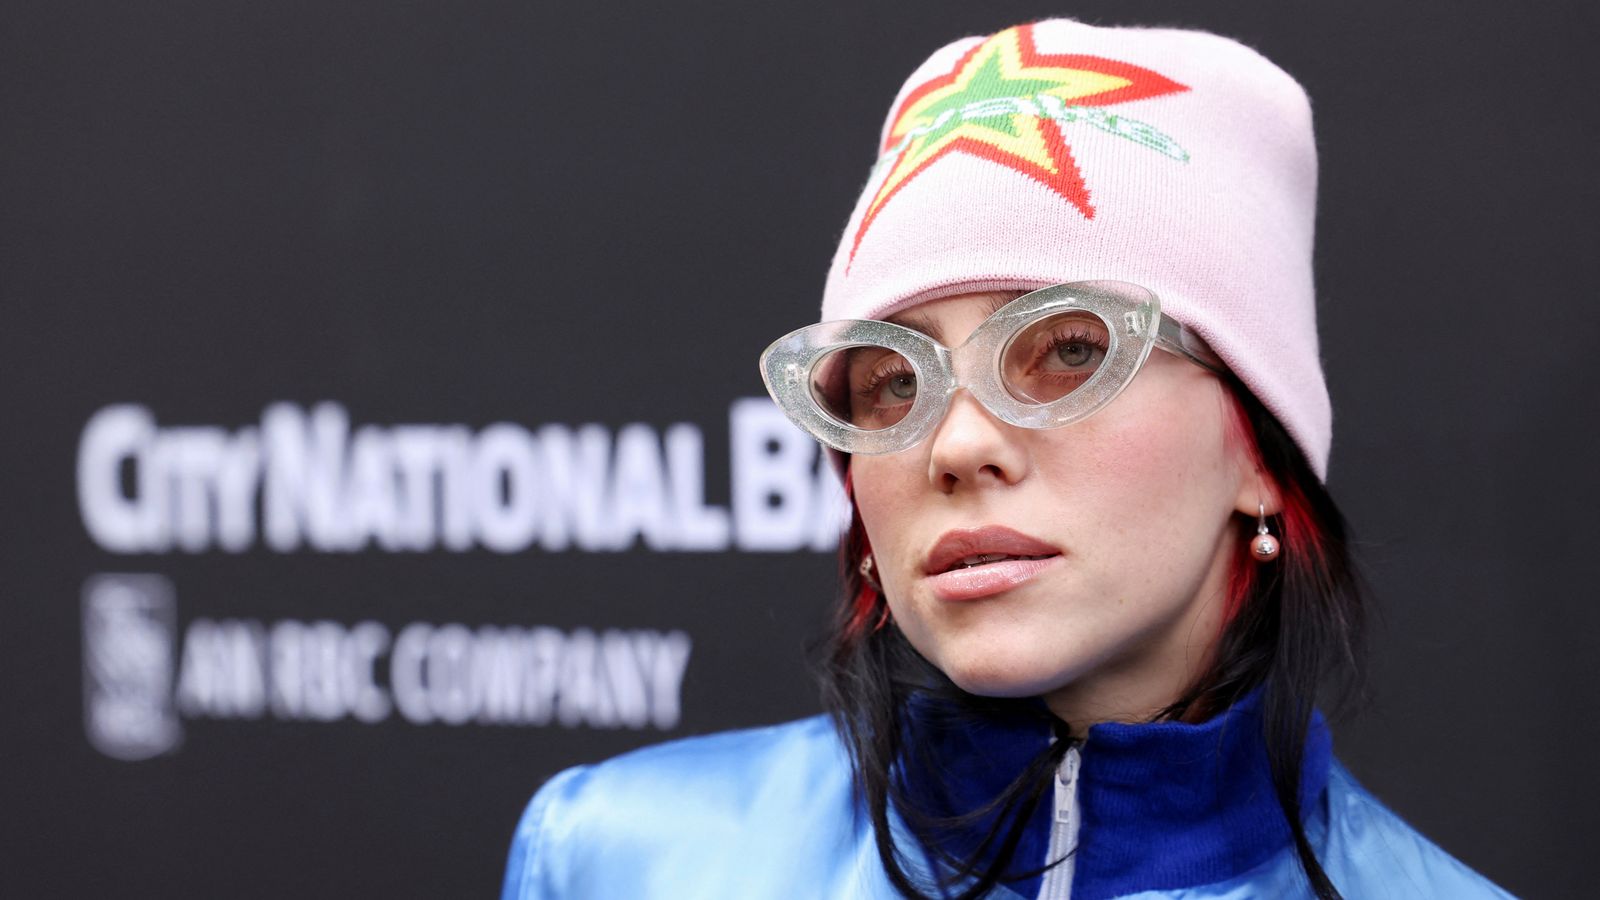 Billie Eilish: Singer says she was outed in red carpet interview by Variety